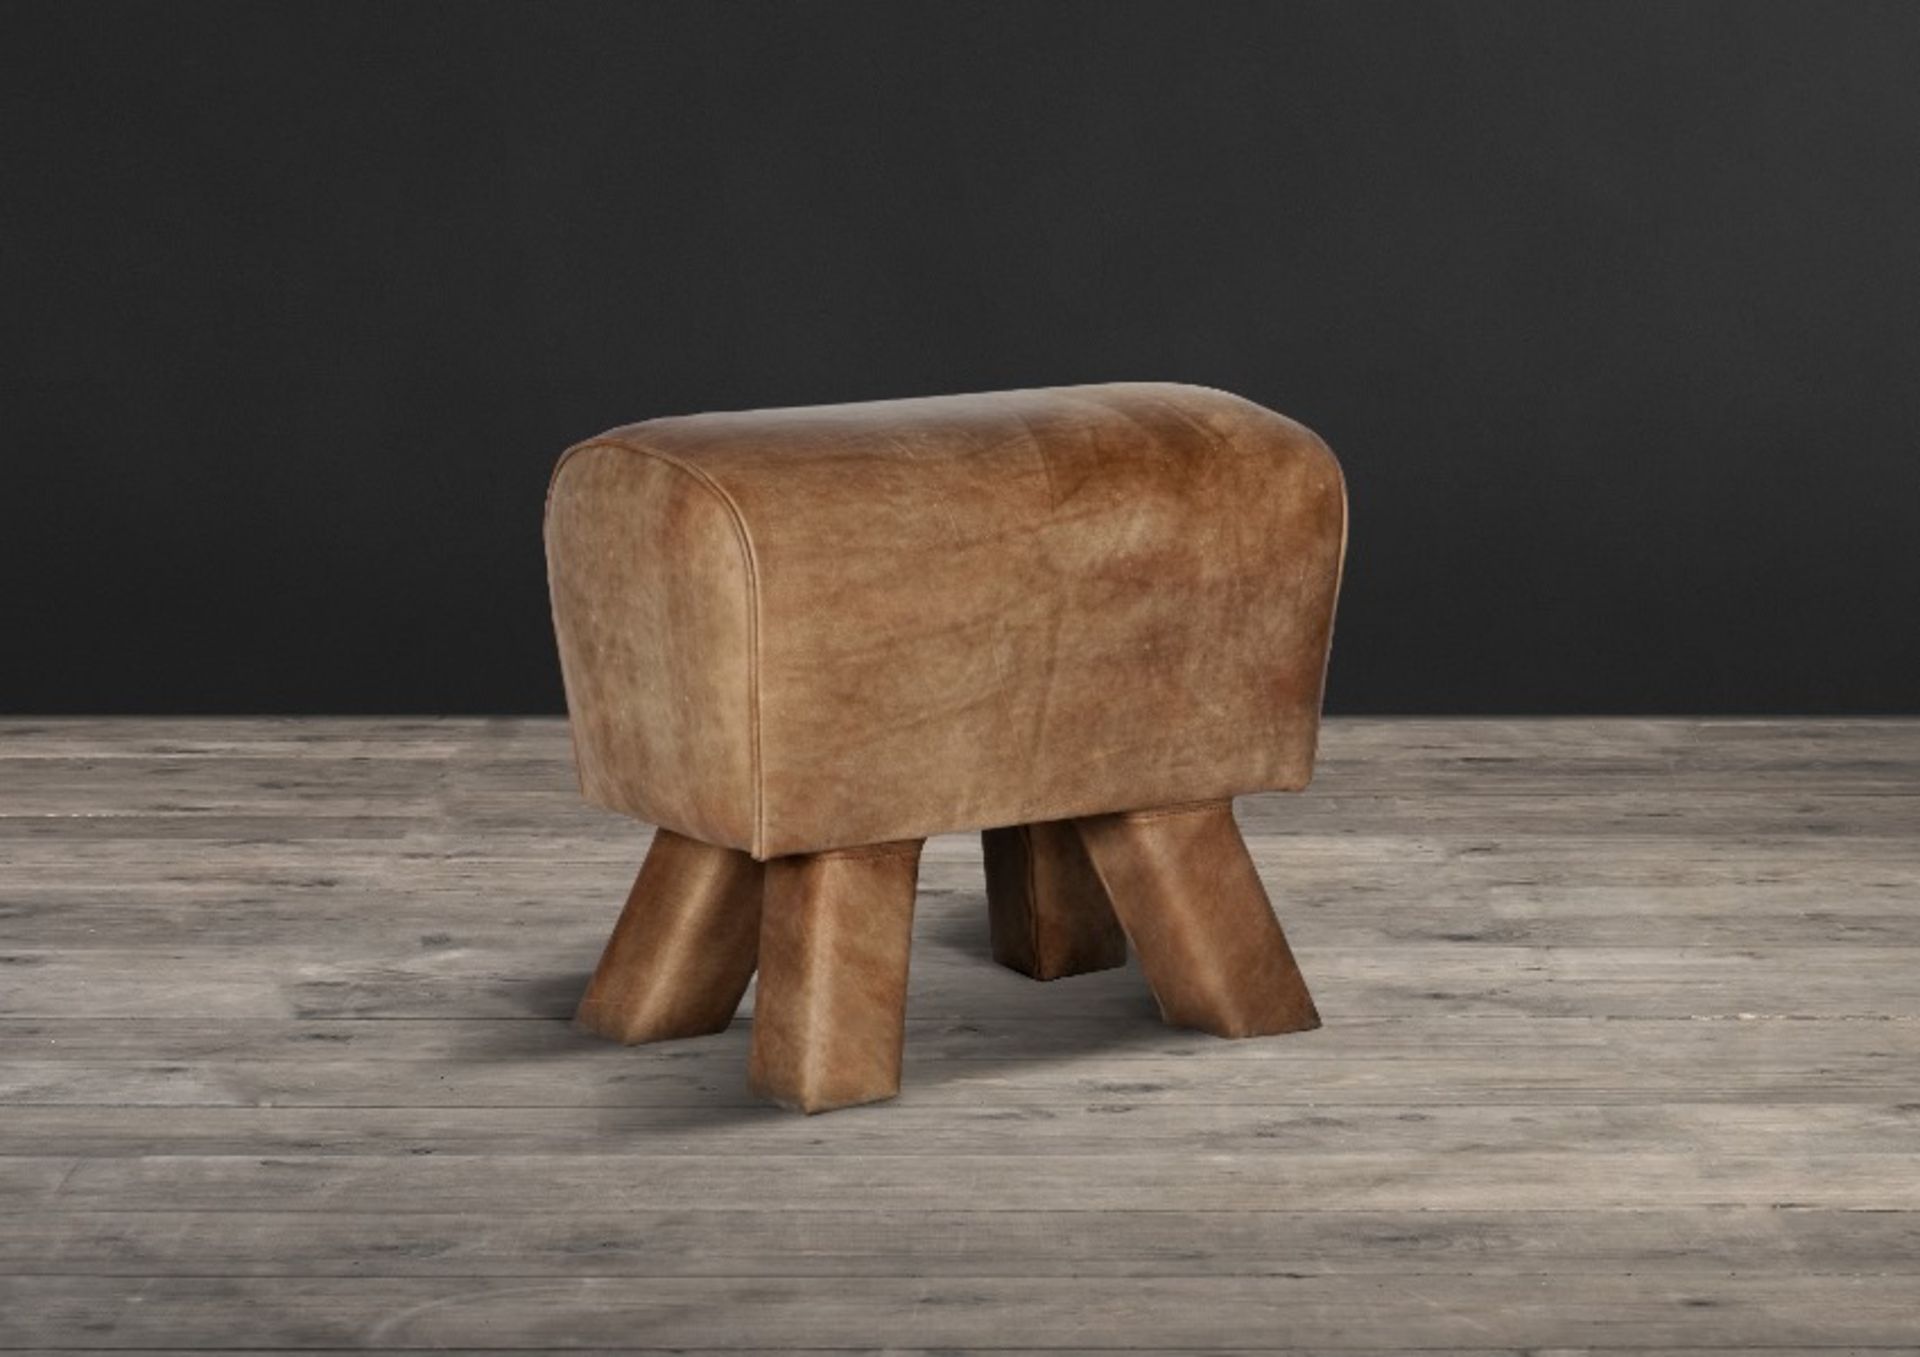 Gym Horse Bench Single Nero Inspired By The World Of Gymnastics And Sport, The Playful Gym Horse